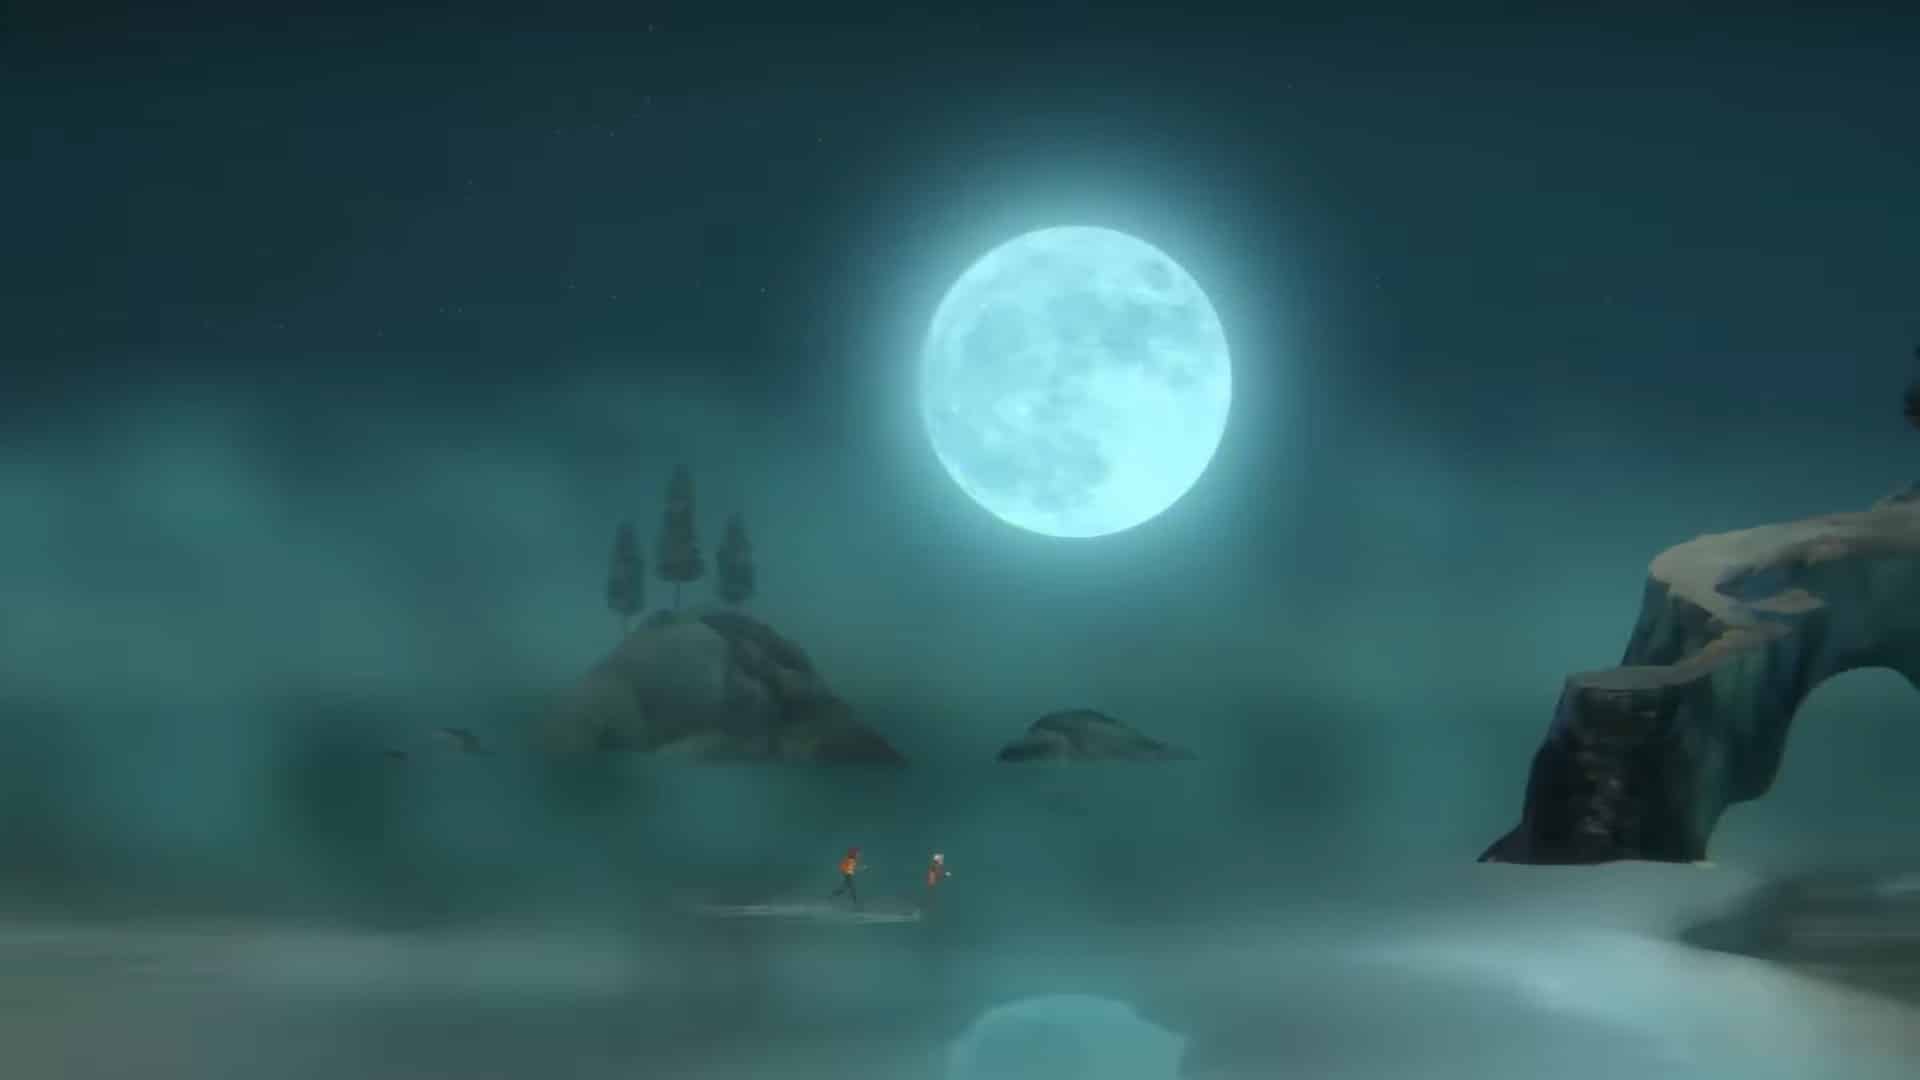 Oxenfree 2 cast and voice actor: Riley and Jacob walking across some water. A large full moon hangs in the sky